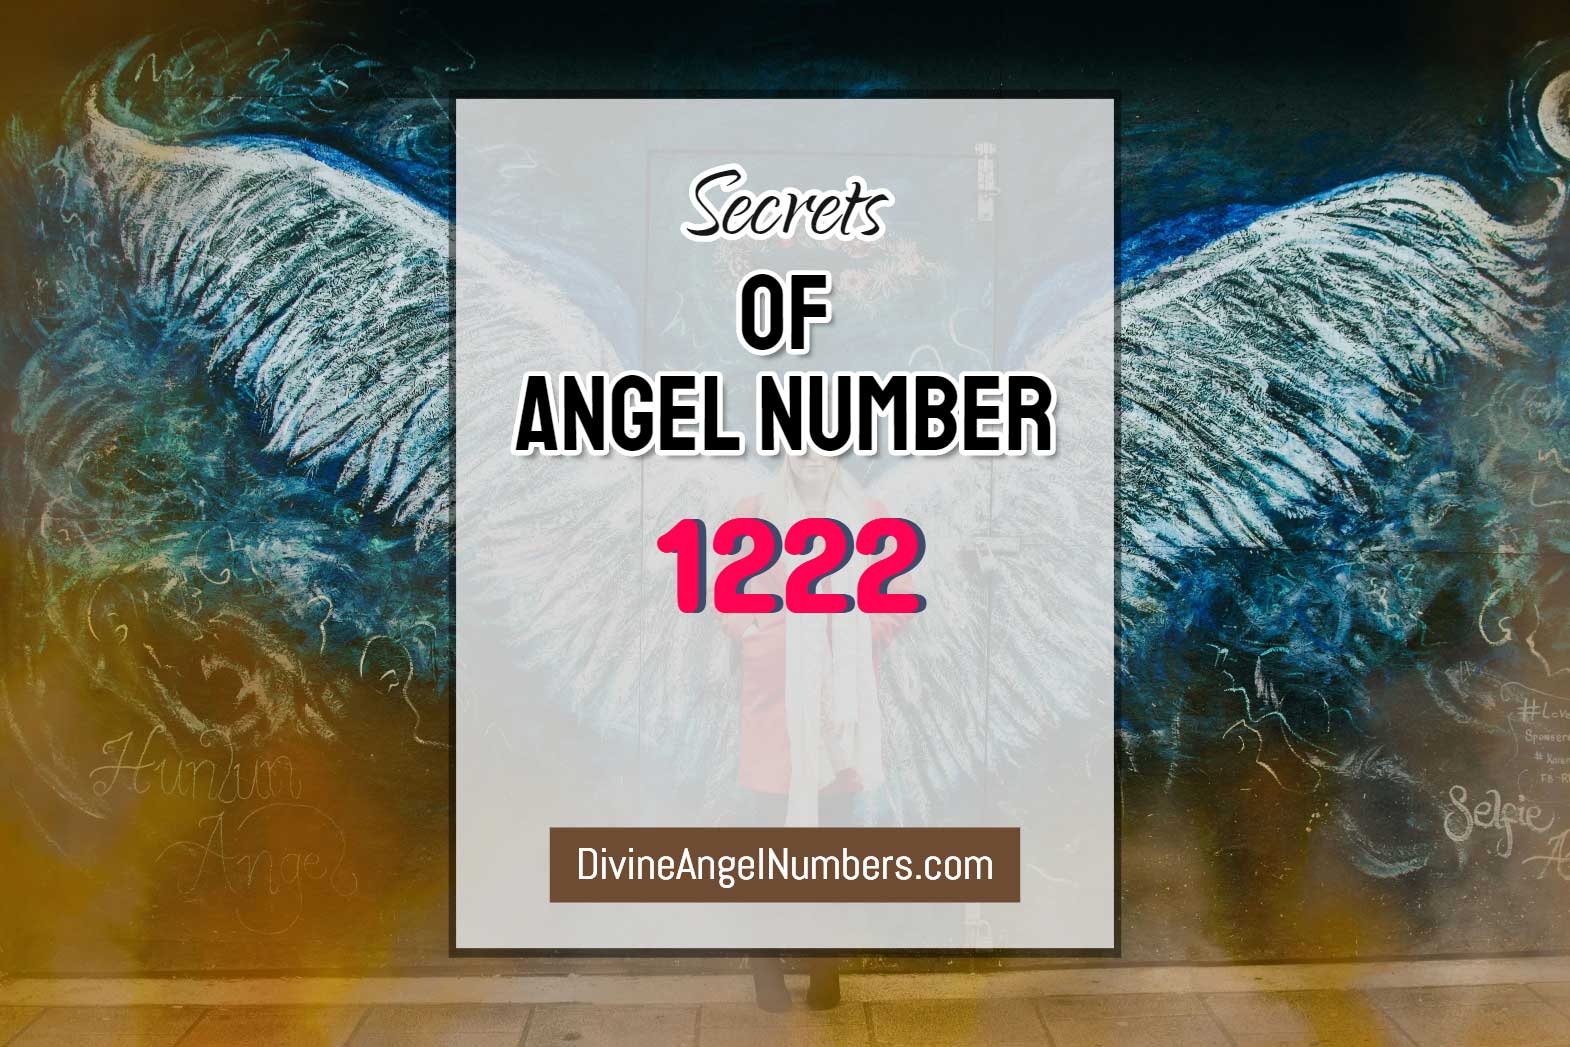 5 Reasons Why You Are Seeing Angel Number 1222 - Meaning Of 1222